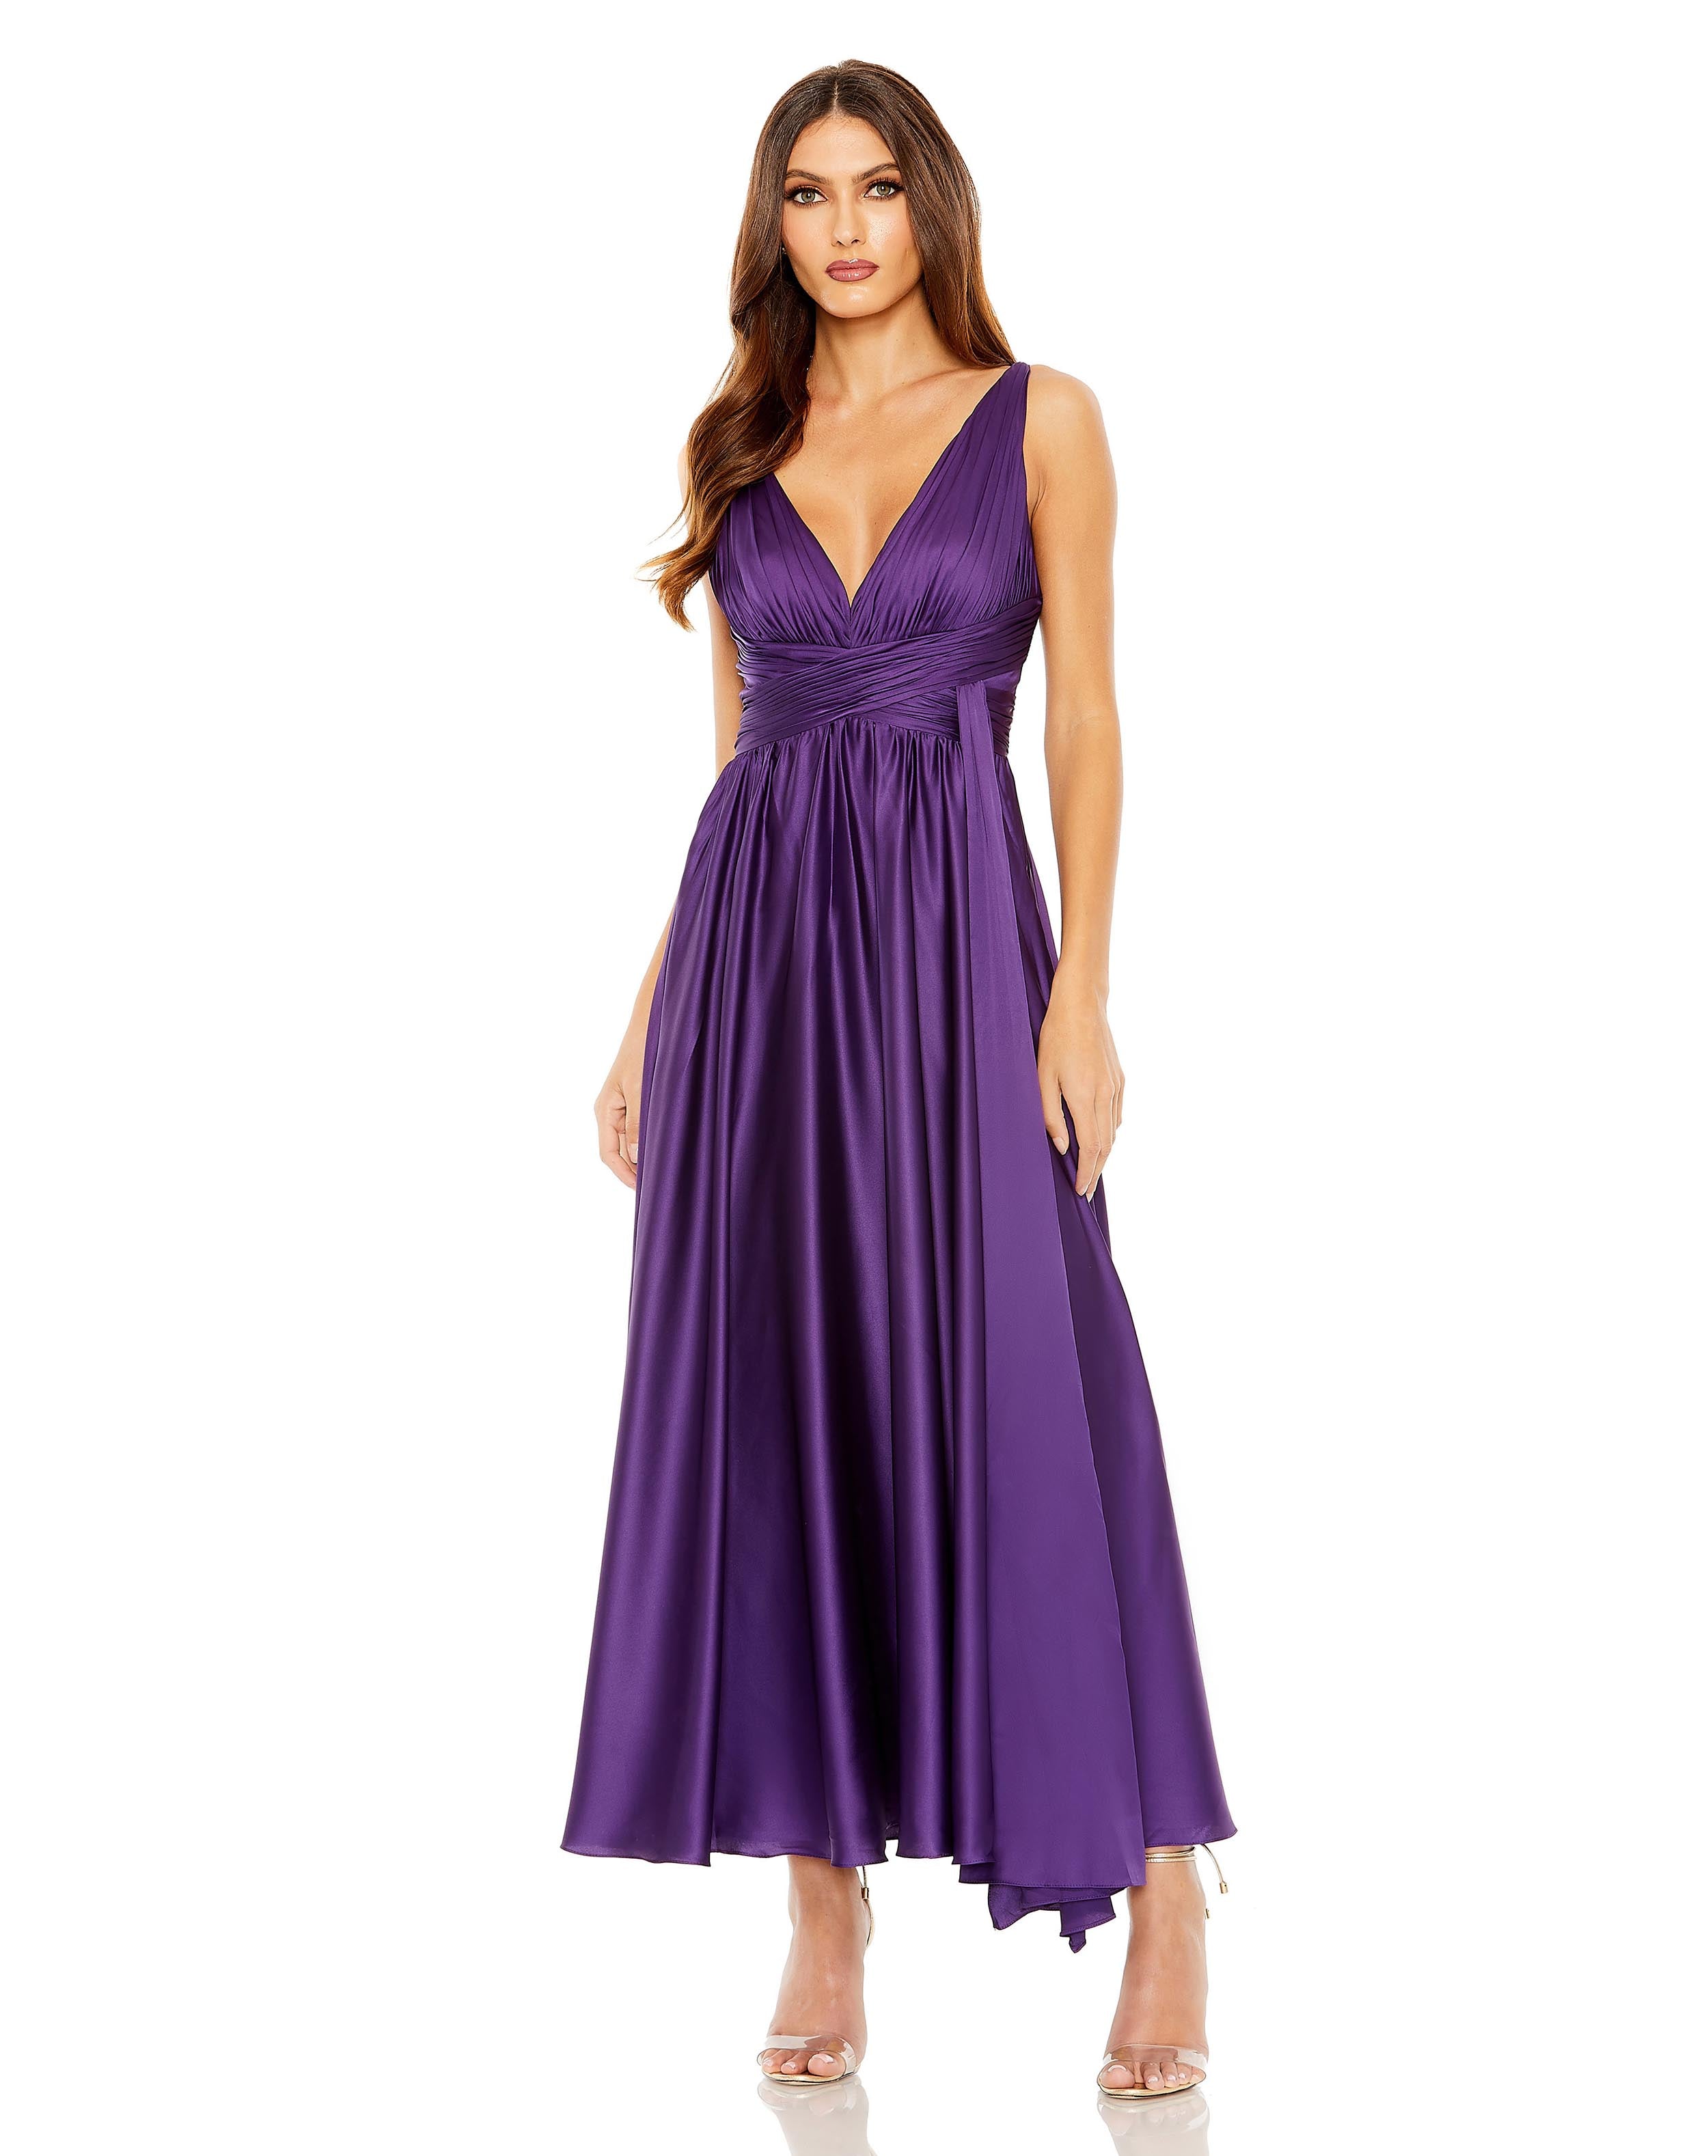 Ruched Top Satin Pleated Tea Length Dress